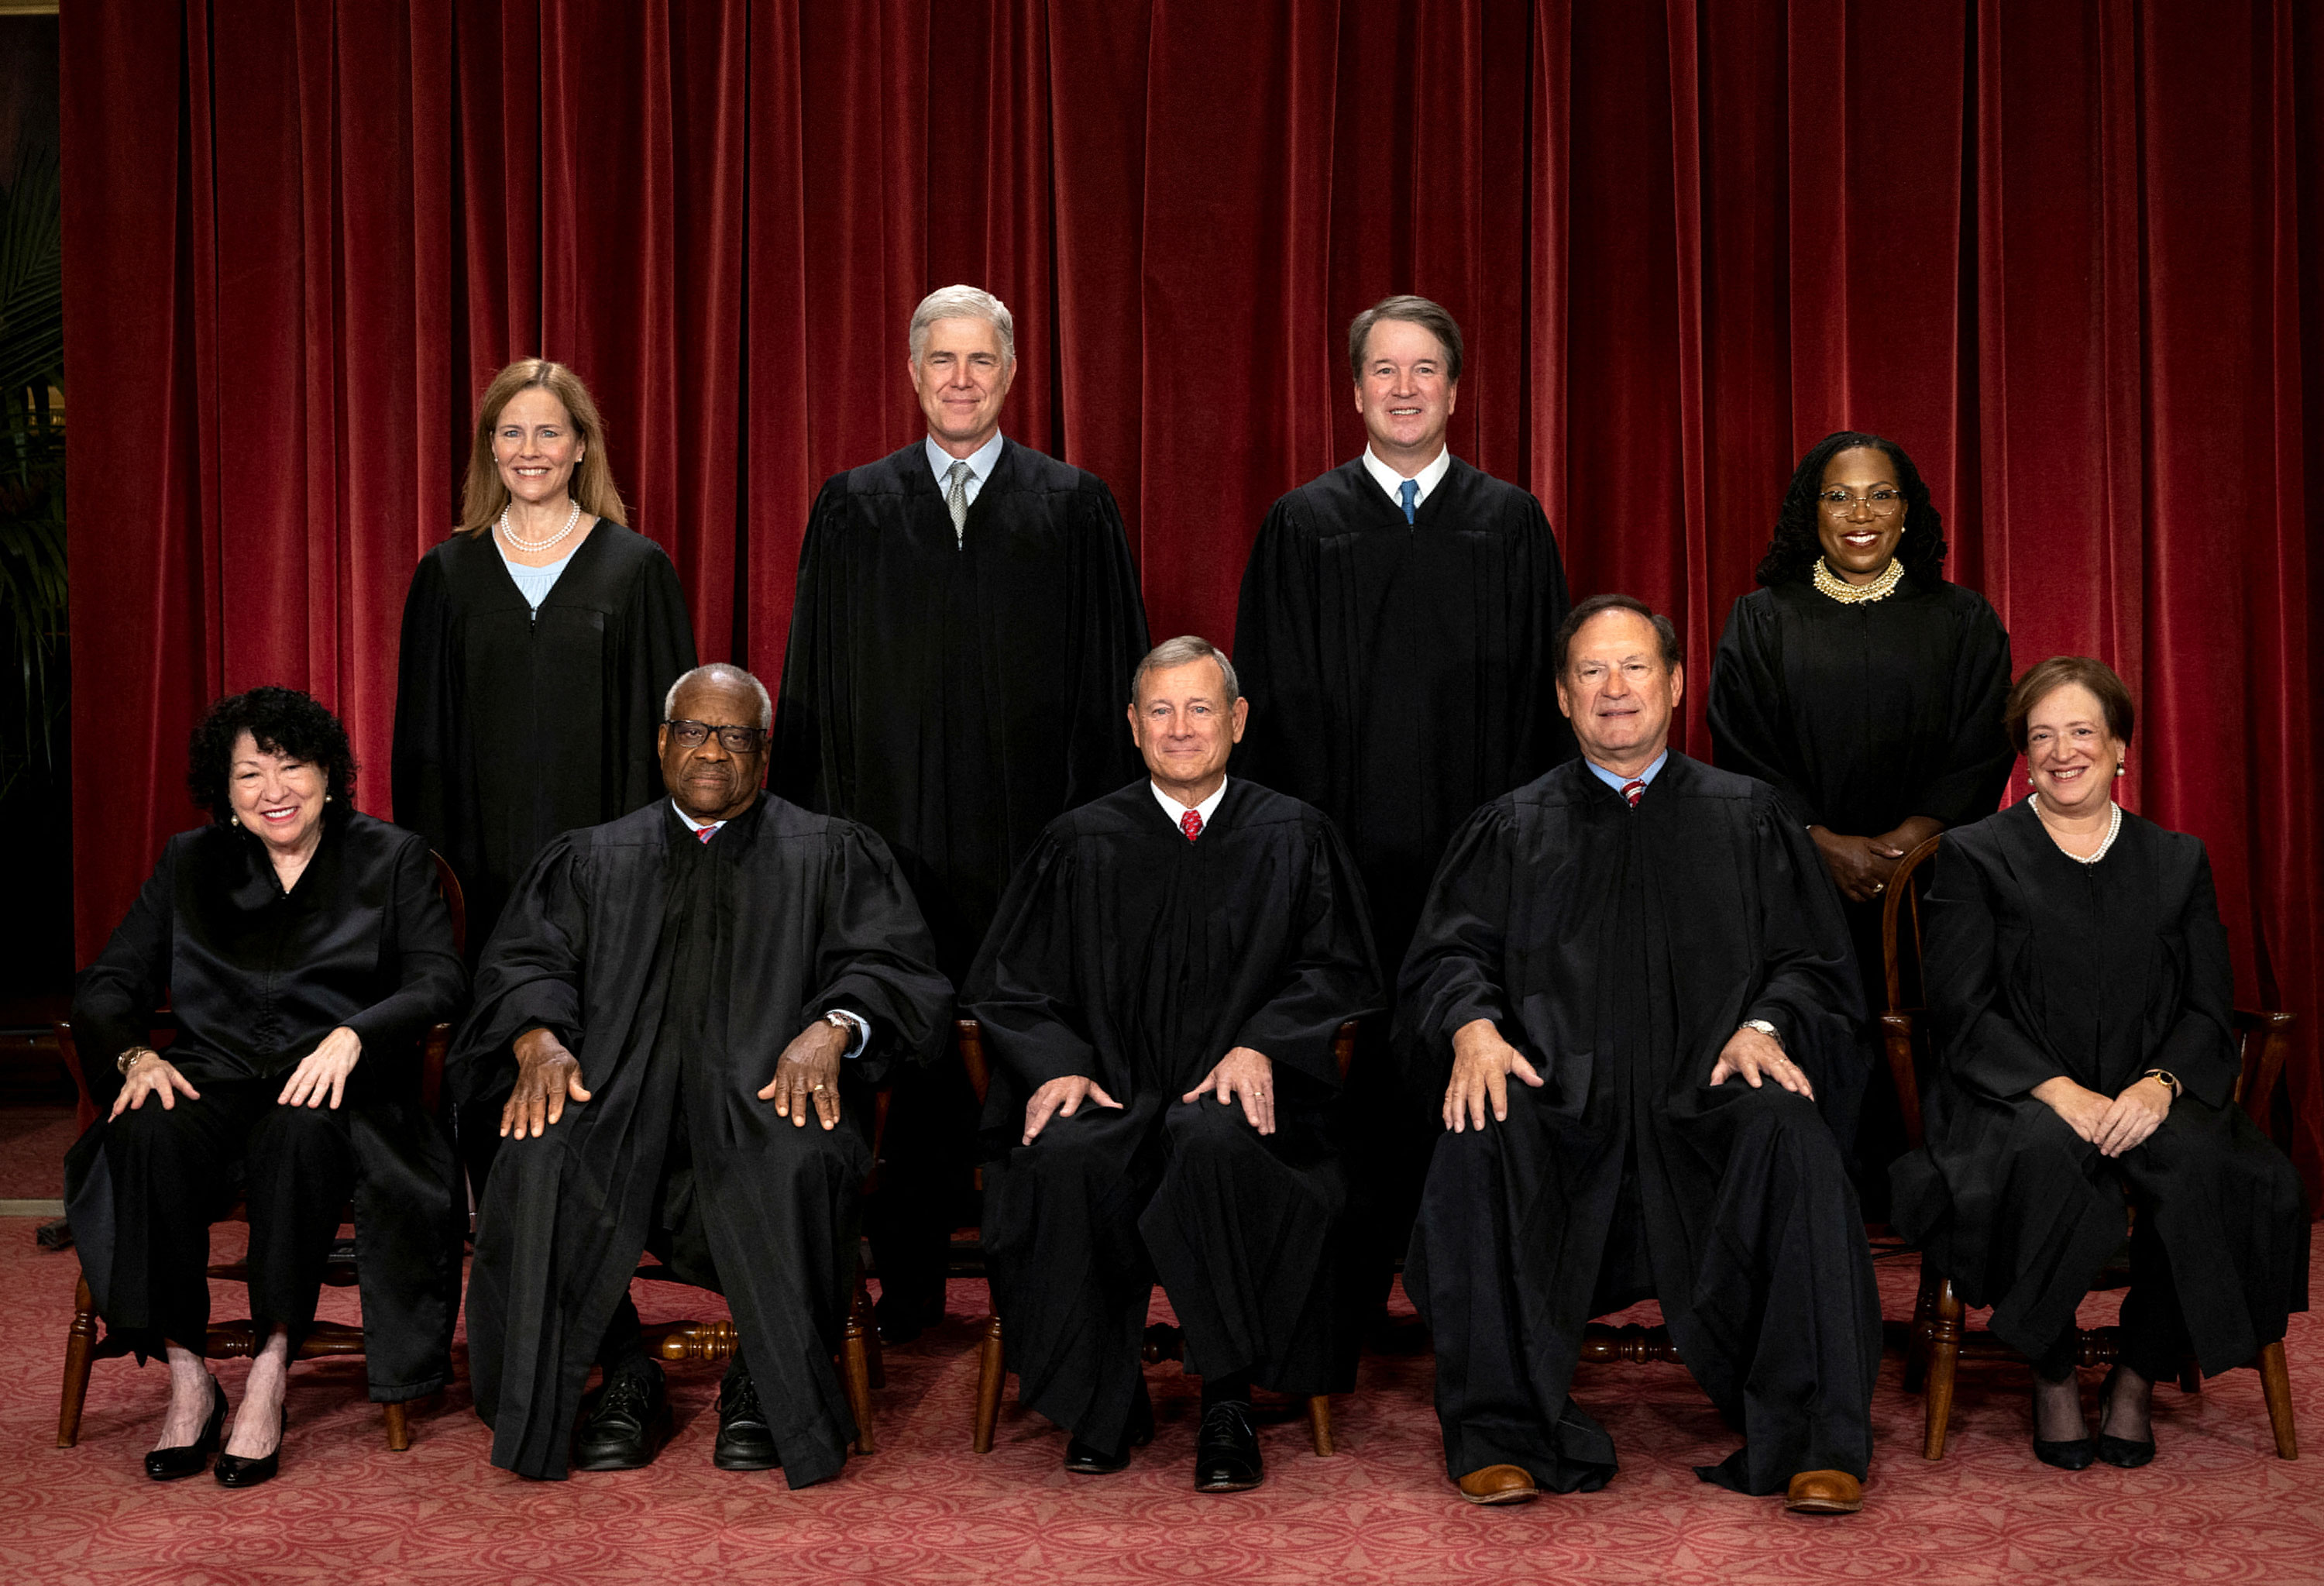 US Supreme Court justices pose for their group portrait in October 2022.